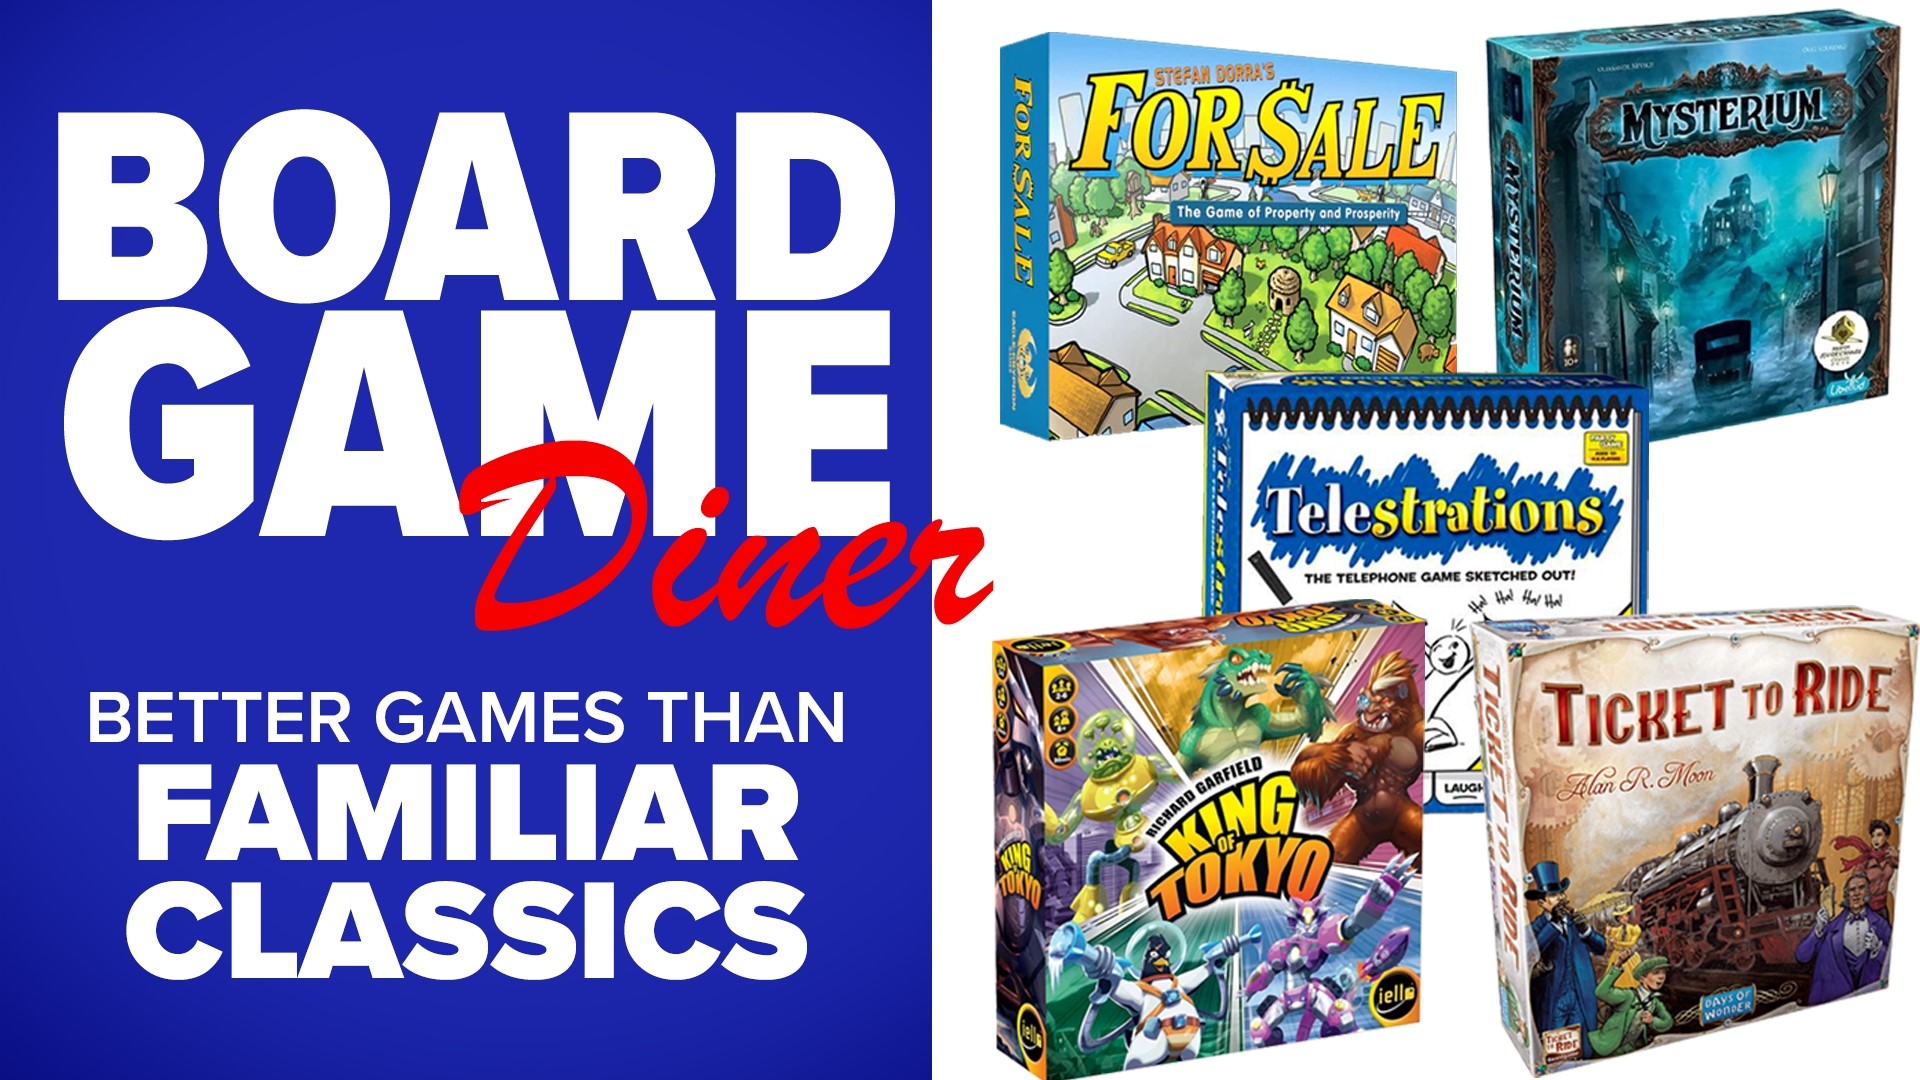 Discover the world of amazing board games out there now! Take a seat at the counter of the Board Game Diner and find some welcoming games for your next game night!